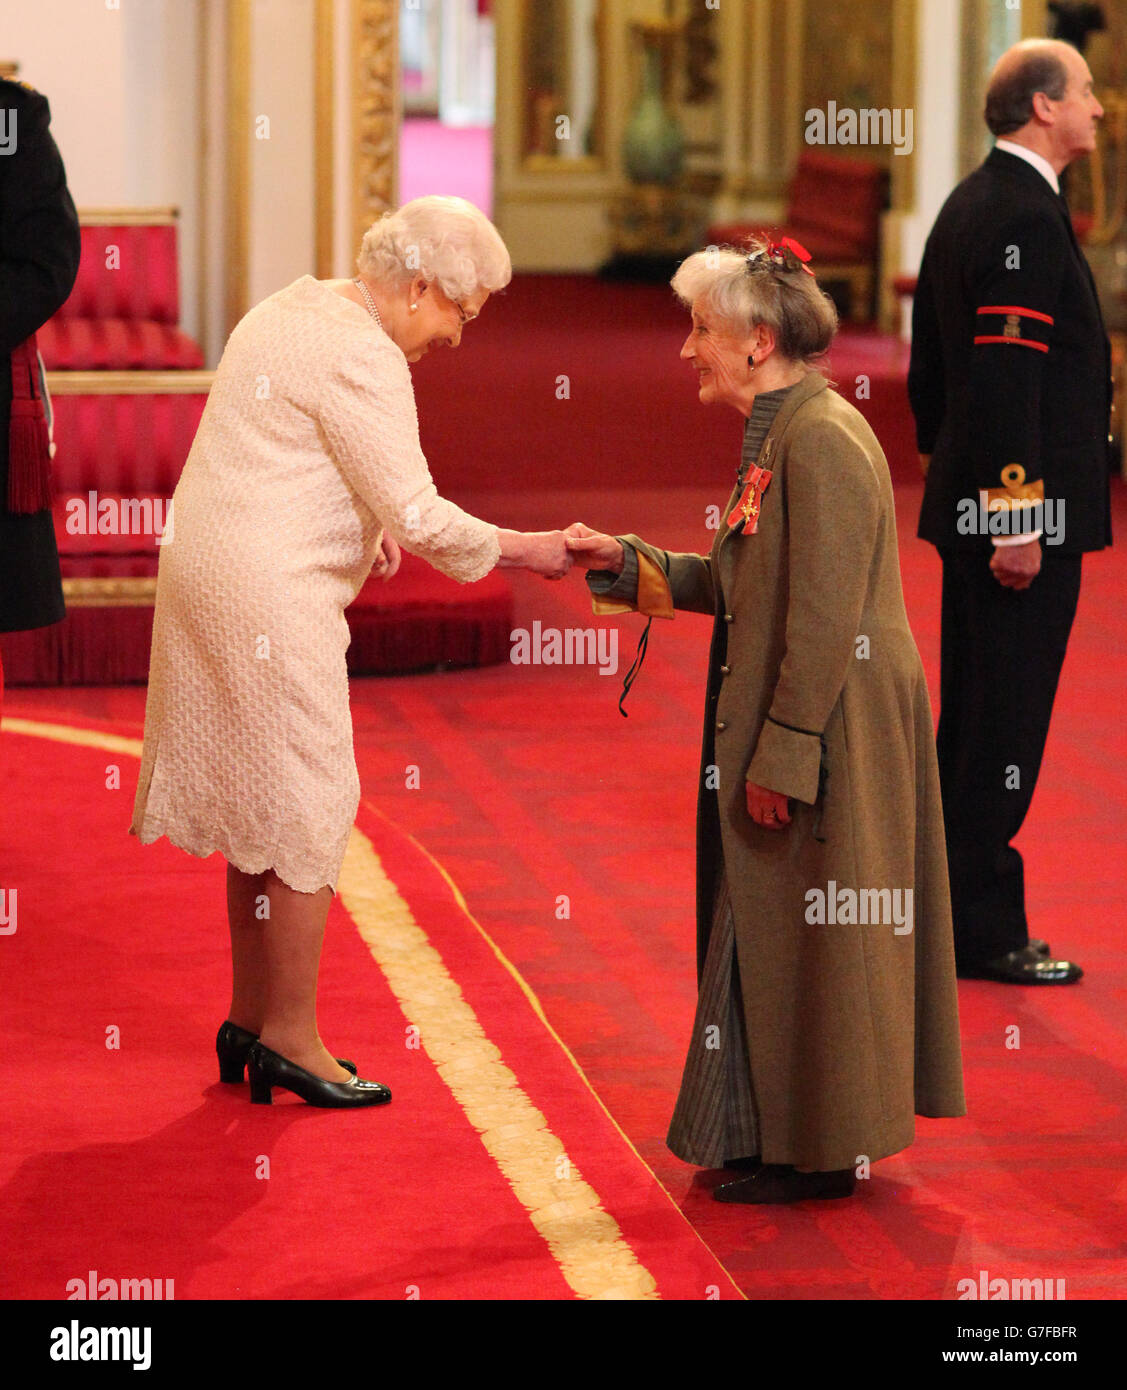 Actress Phyllida Law is made an Officer of the Order of the British Empire (OBE) by Queen Elizabeth II during an Investiture ceremony at Buckingham Palace, central London. Stock Photo